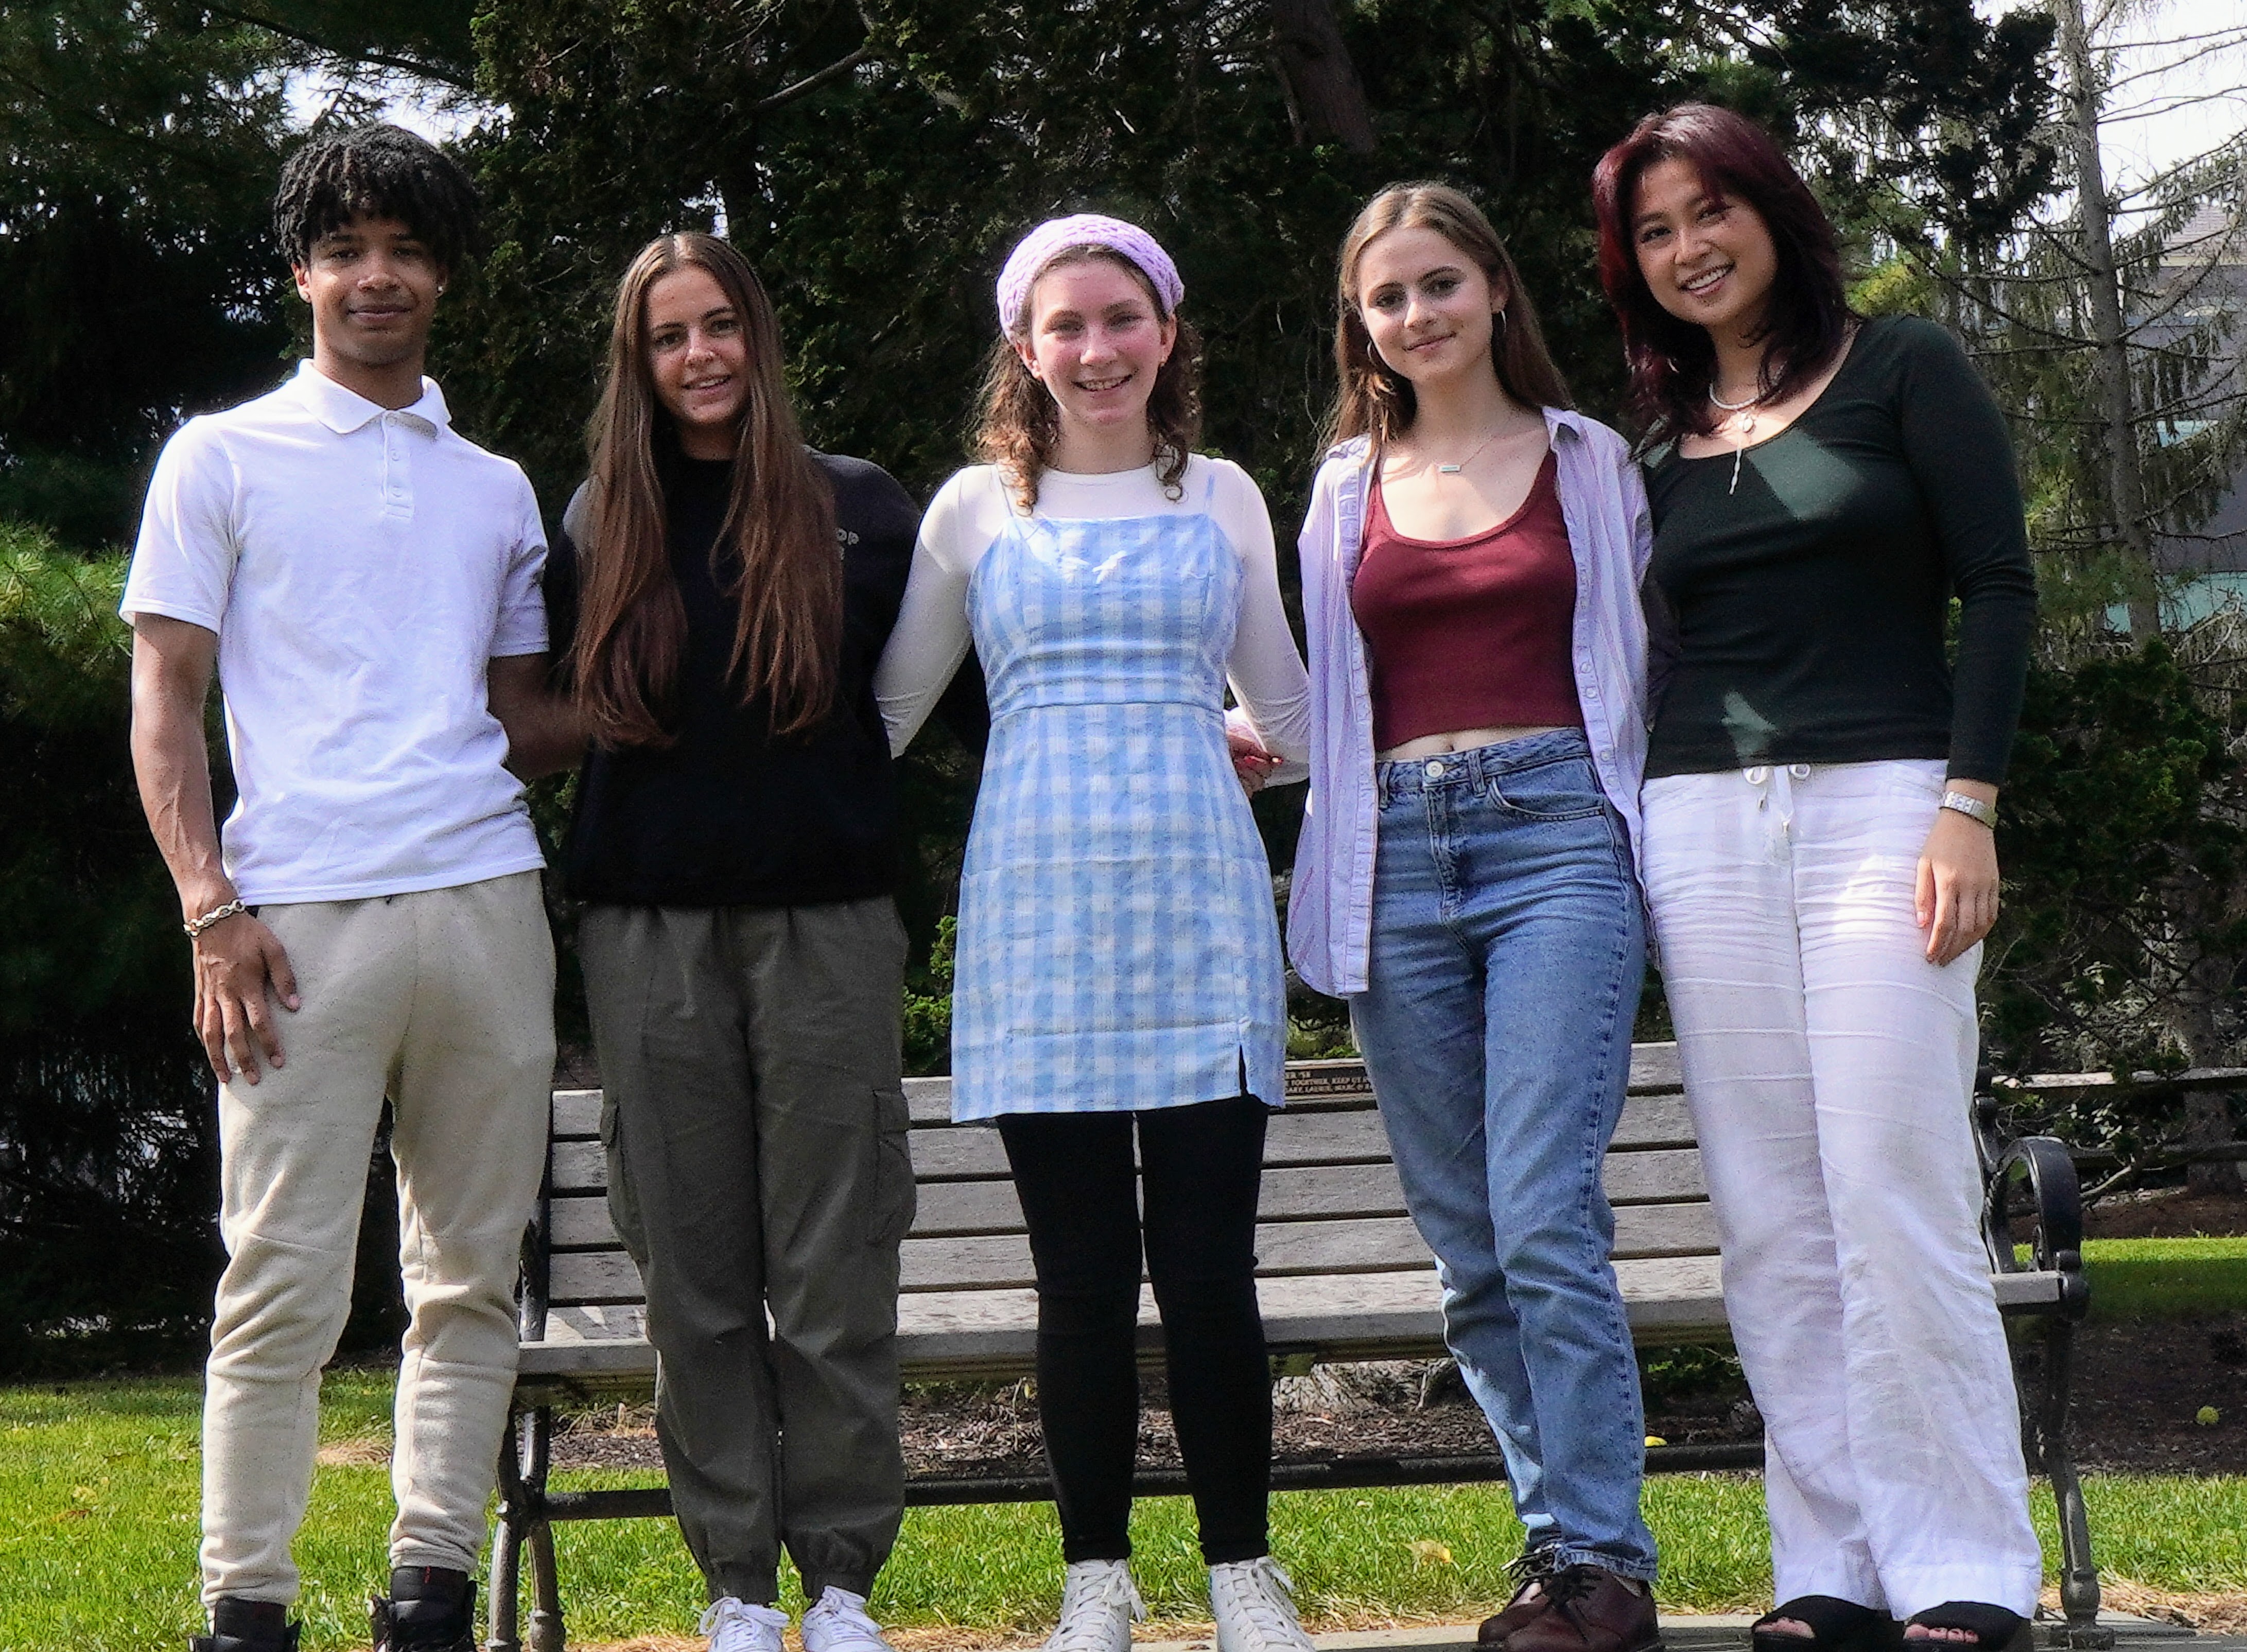 Five students standing outside in front of trees with their arms around each other smiling for the camera.